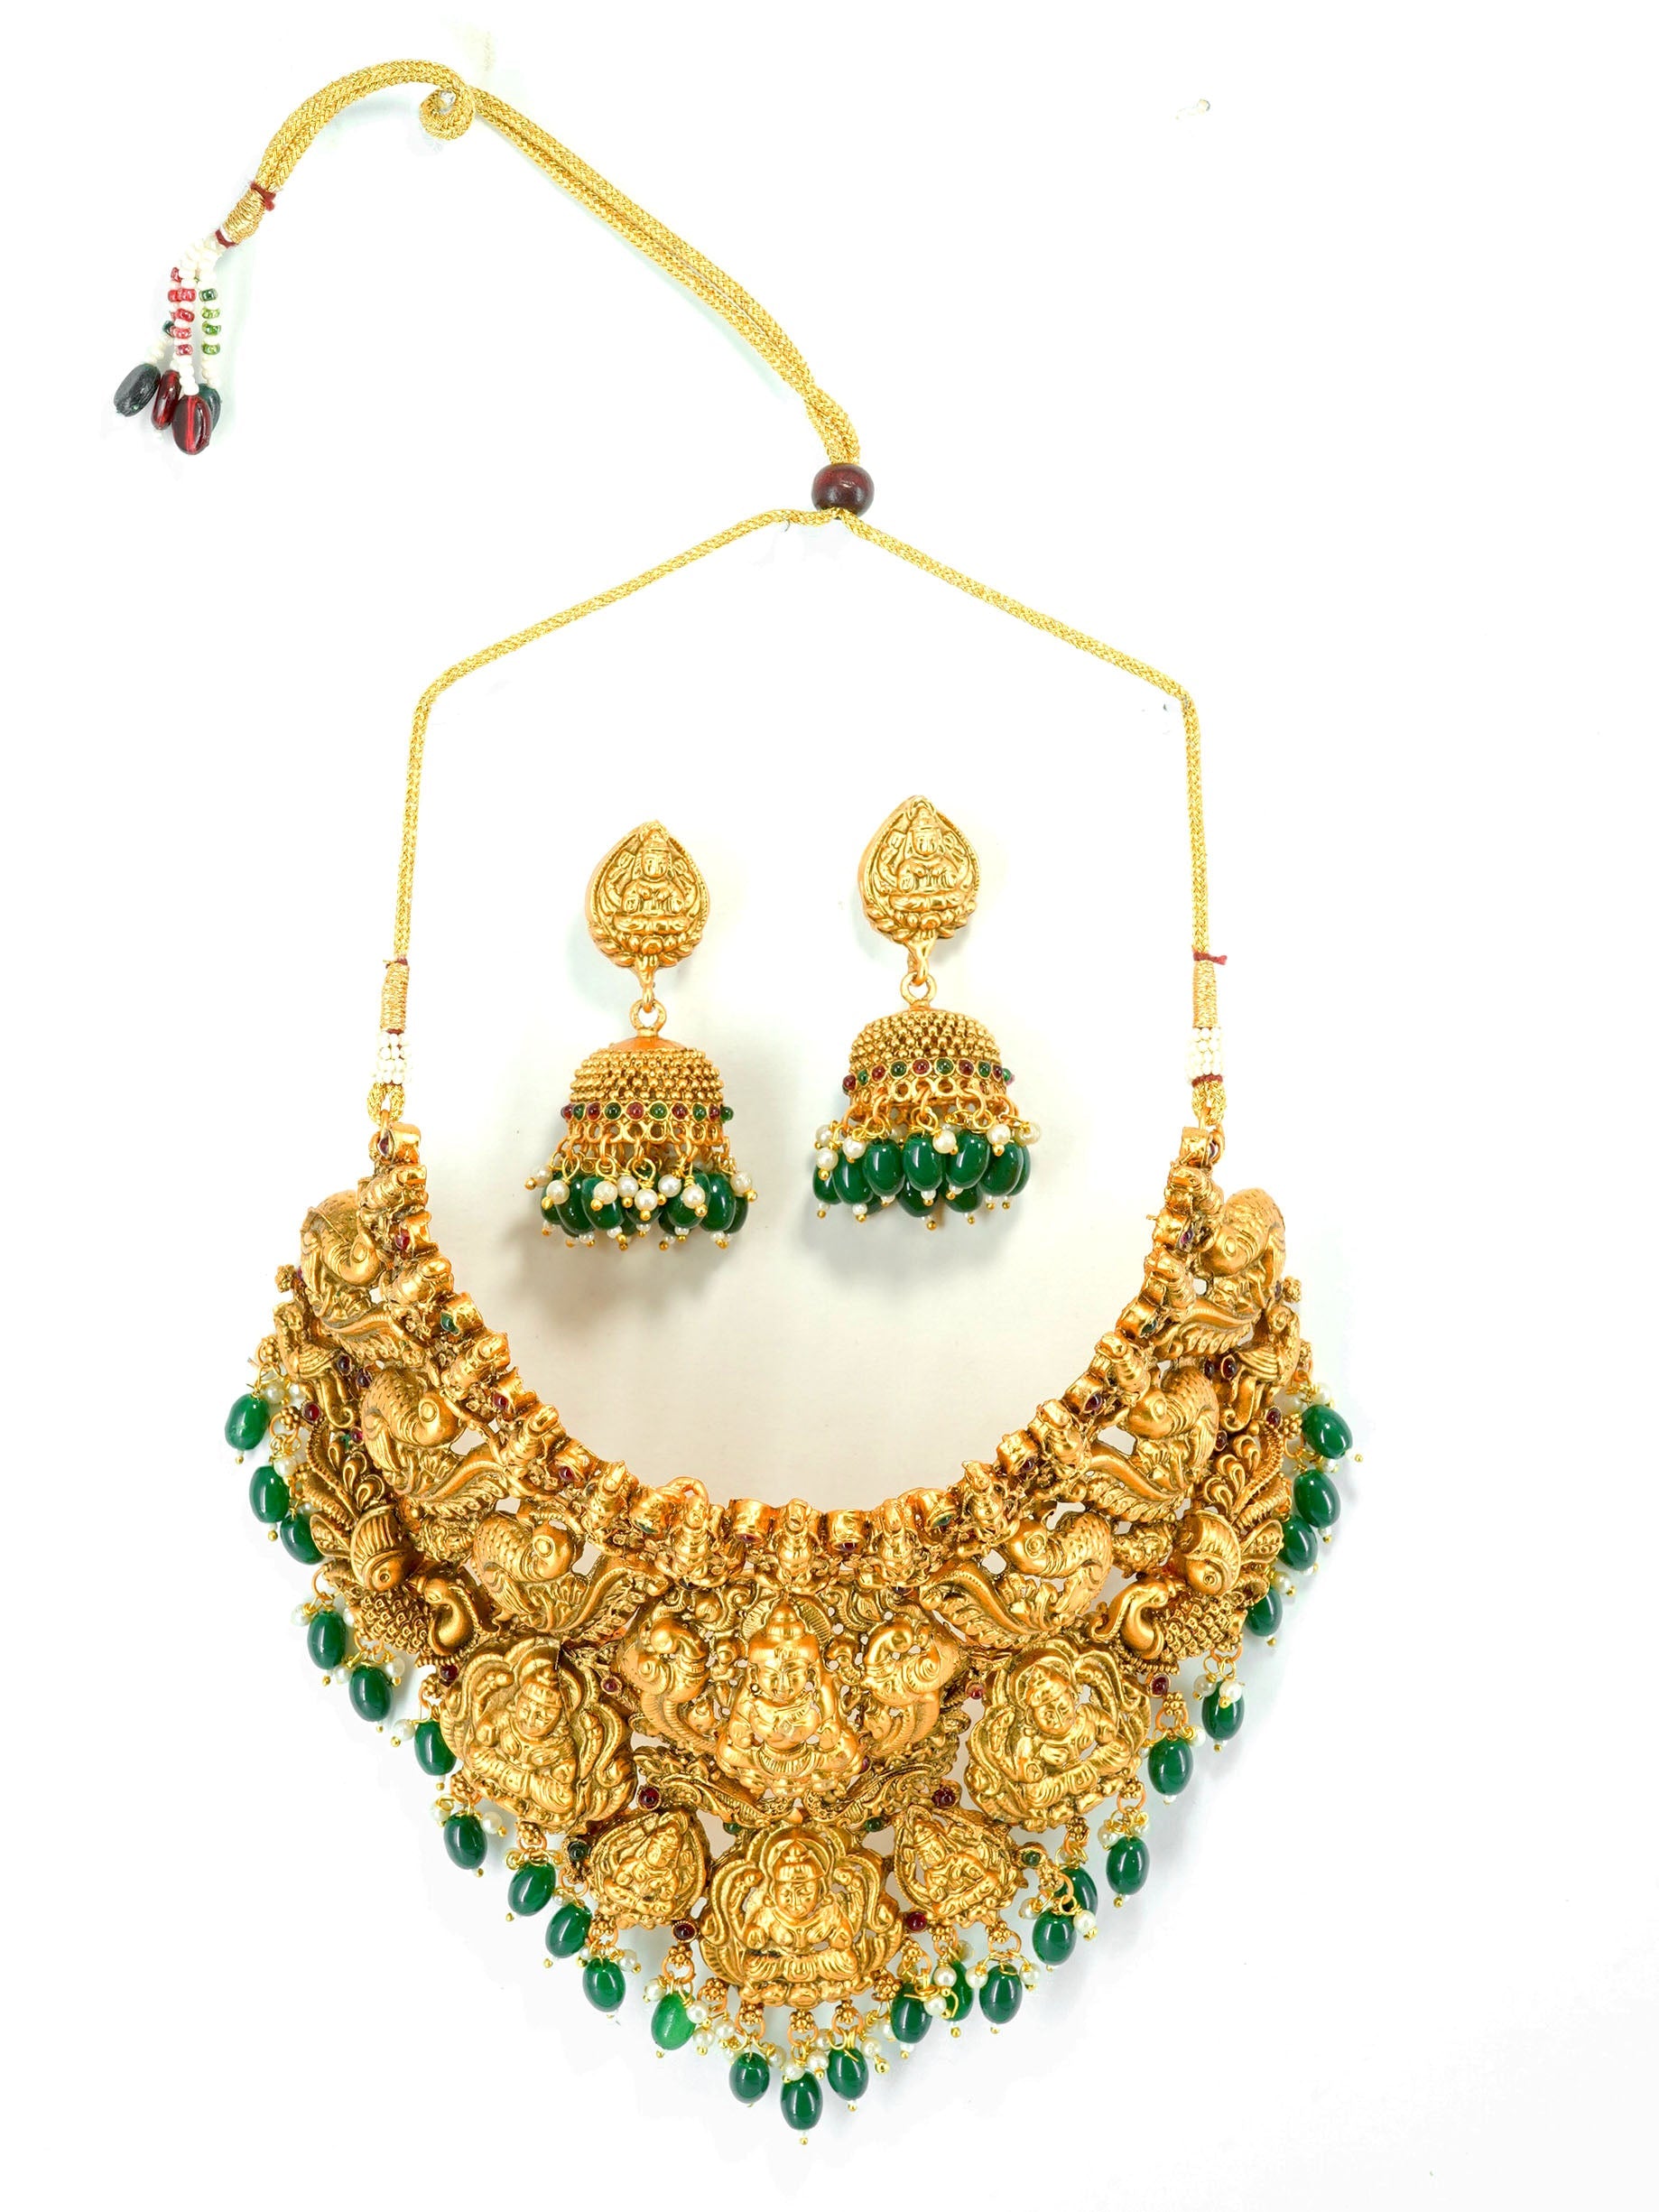 Premium Gold Plated Heavy Laxmi Choker Necklace set for Special Occasions 9639N